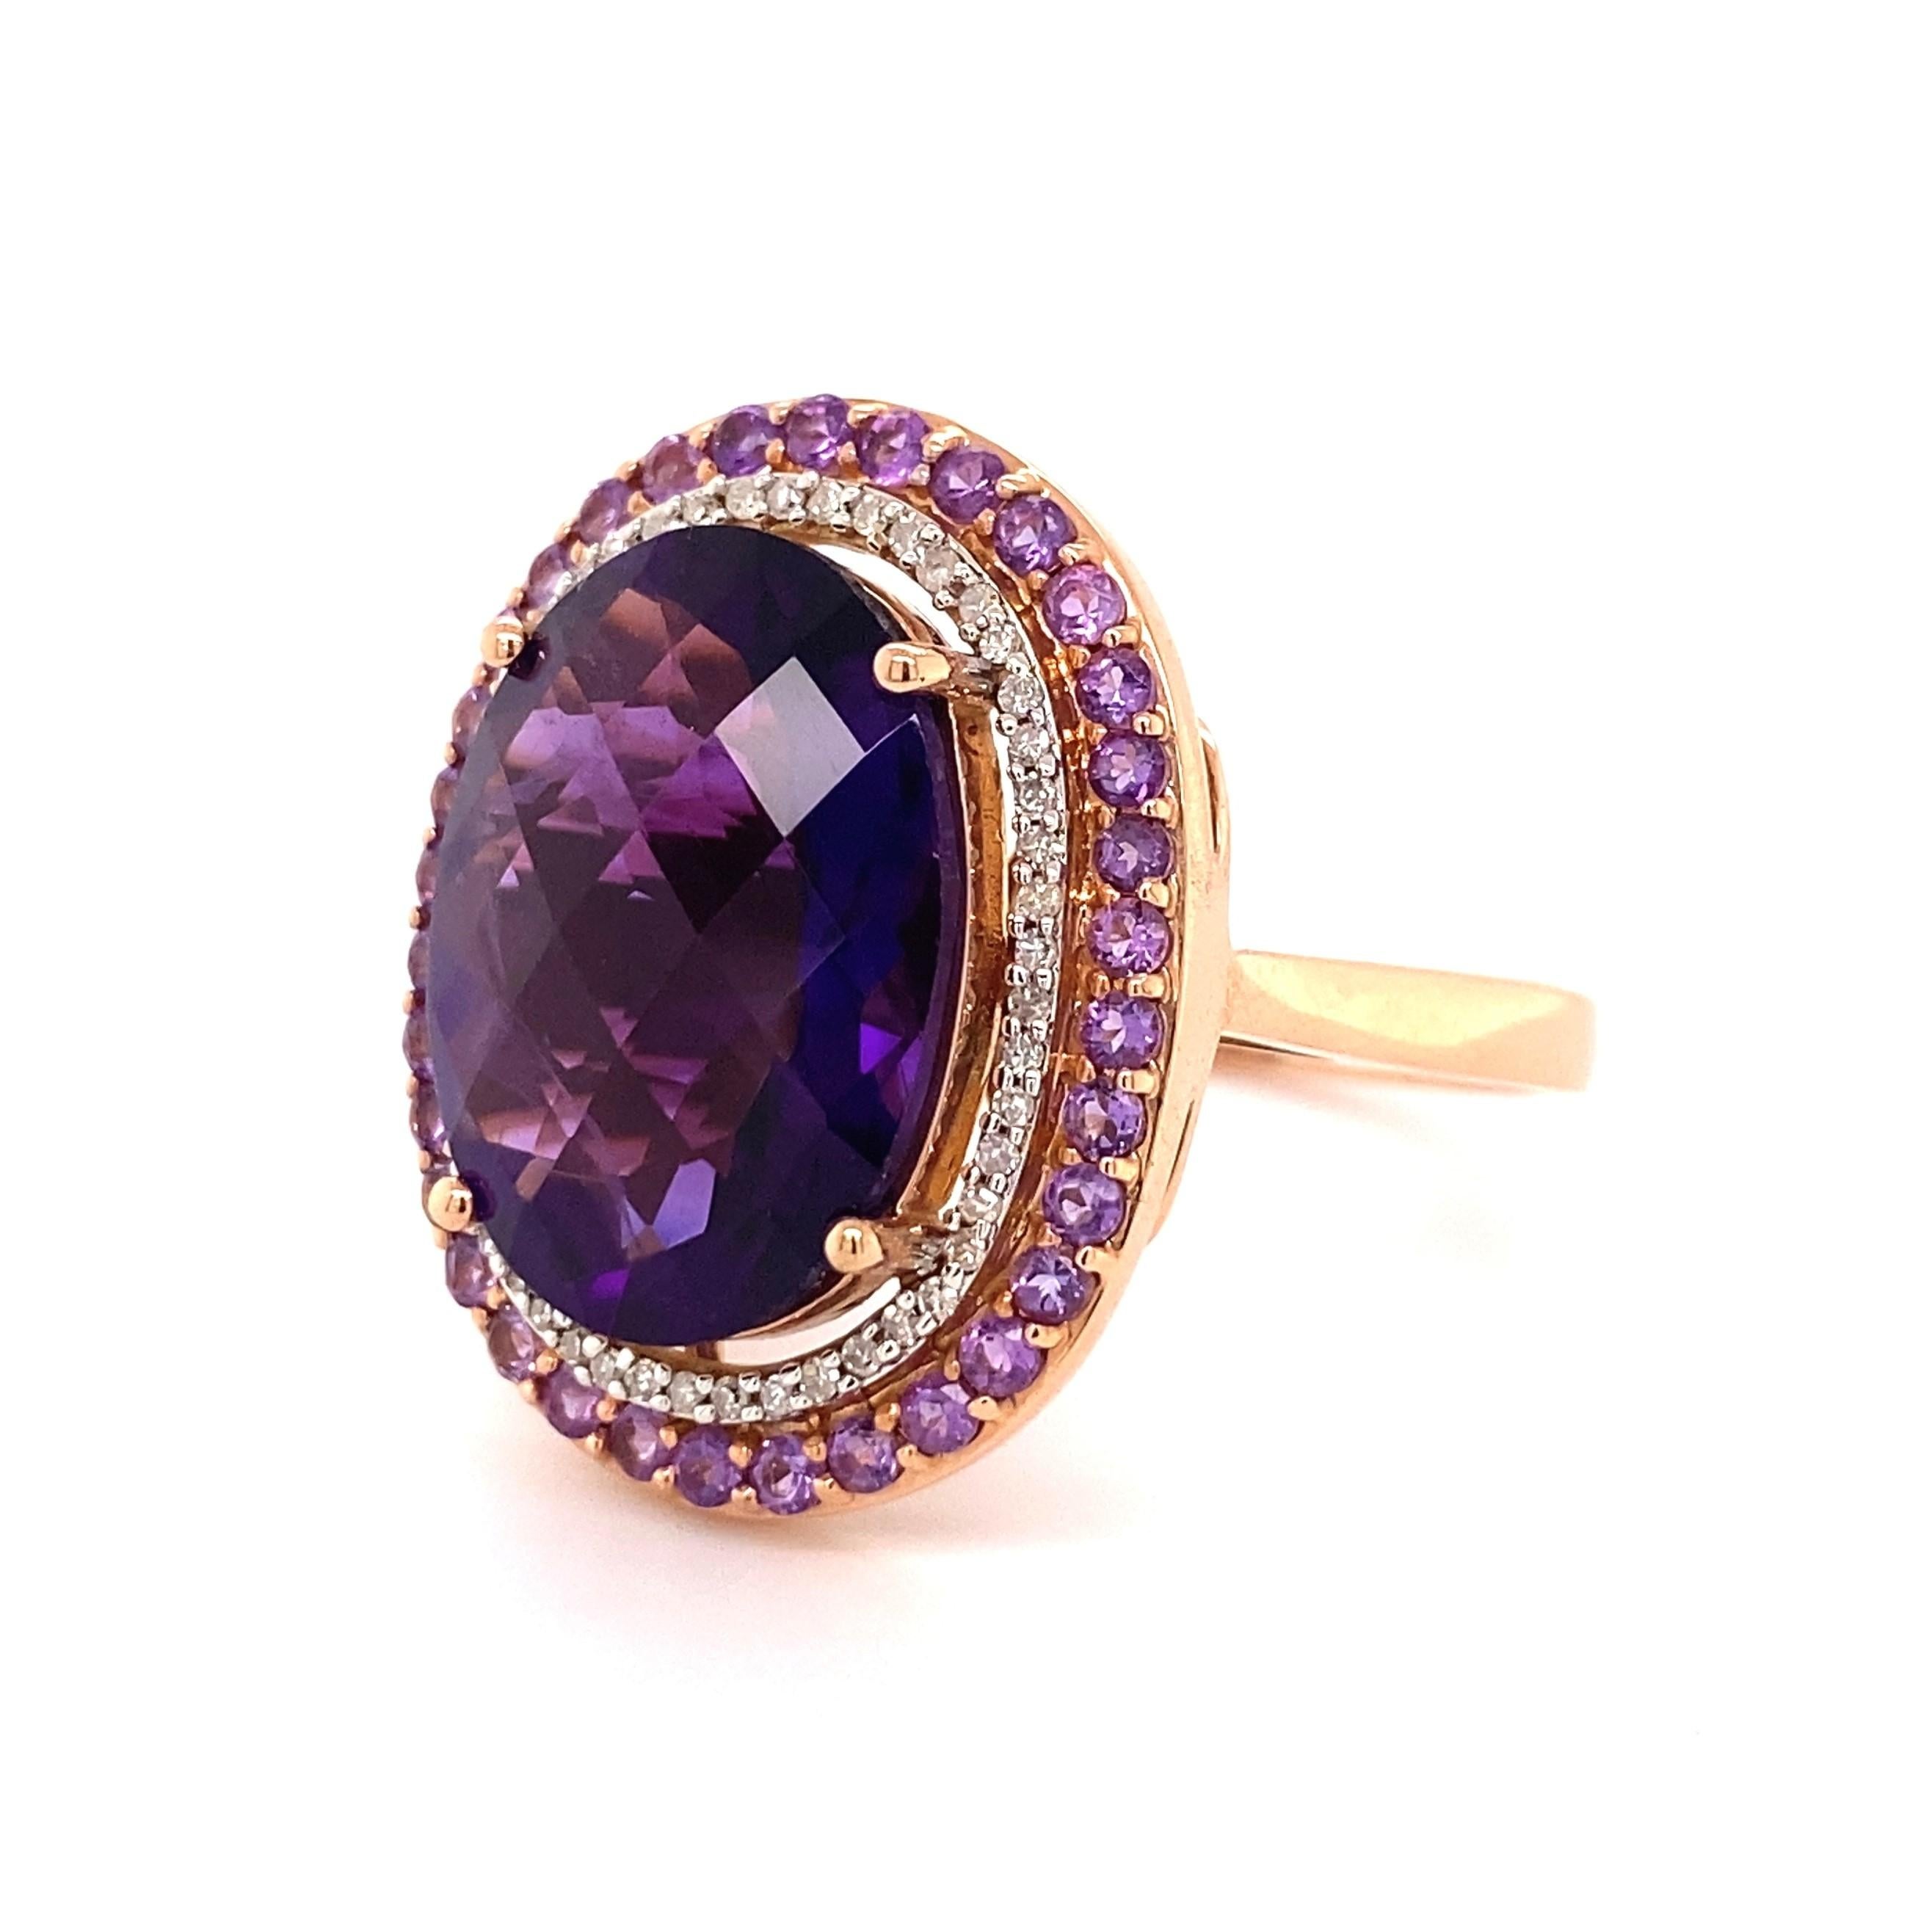 Awesome Large Oval Amethyst and Diamond Cocktail Ring Estate Fine Jewelry In Excellent Condition For Sale In Montreal, QC